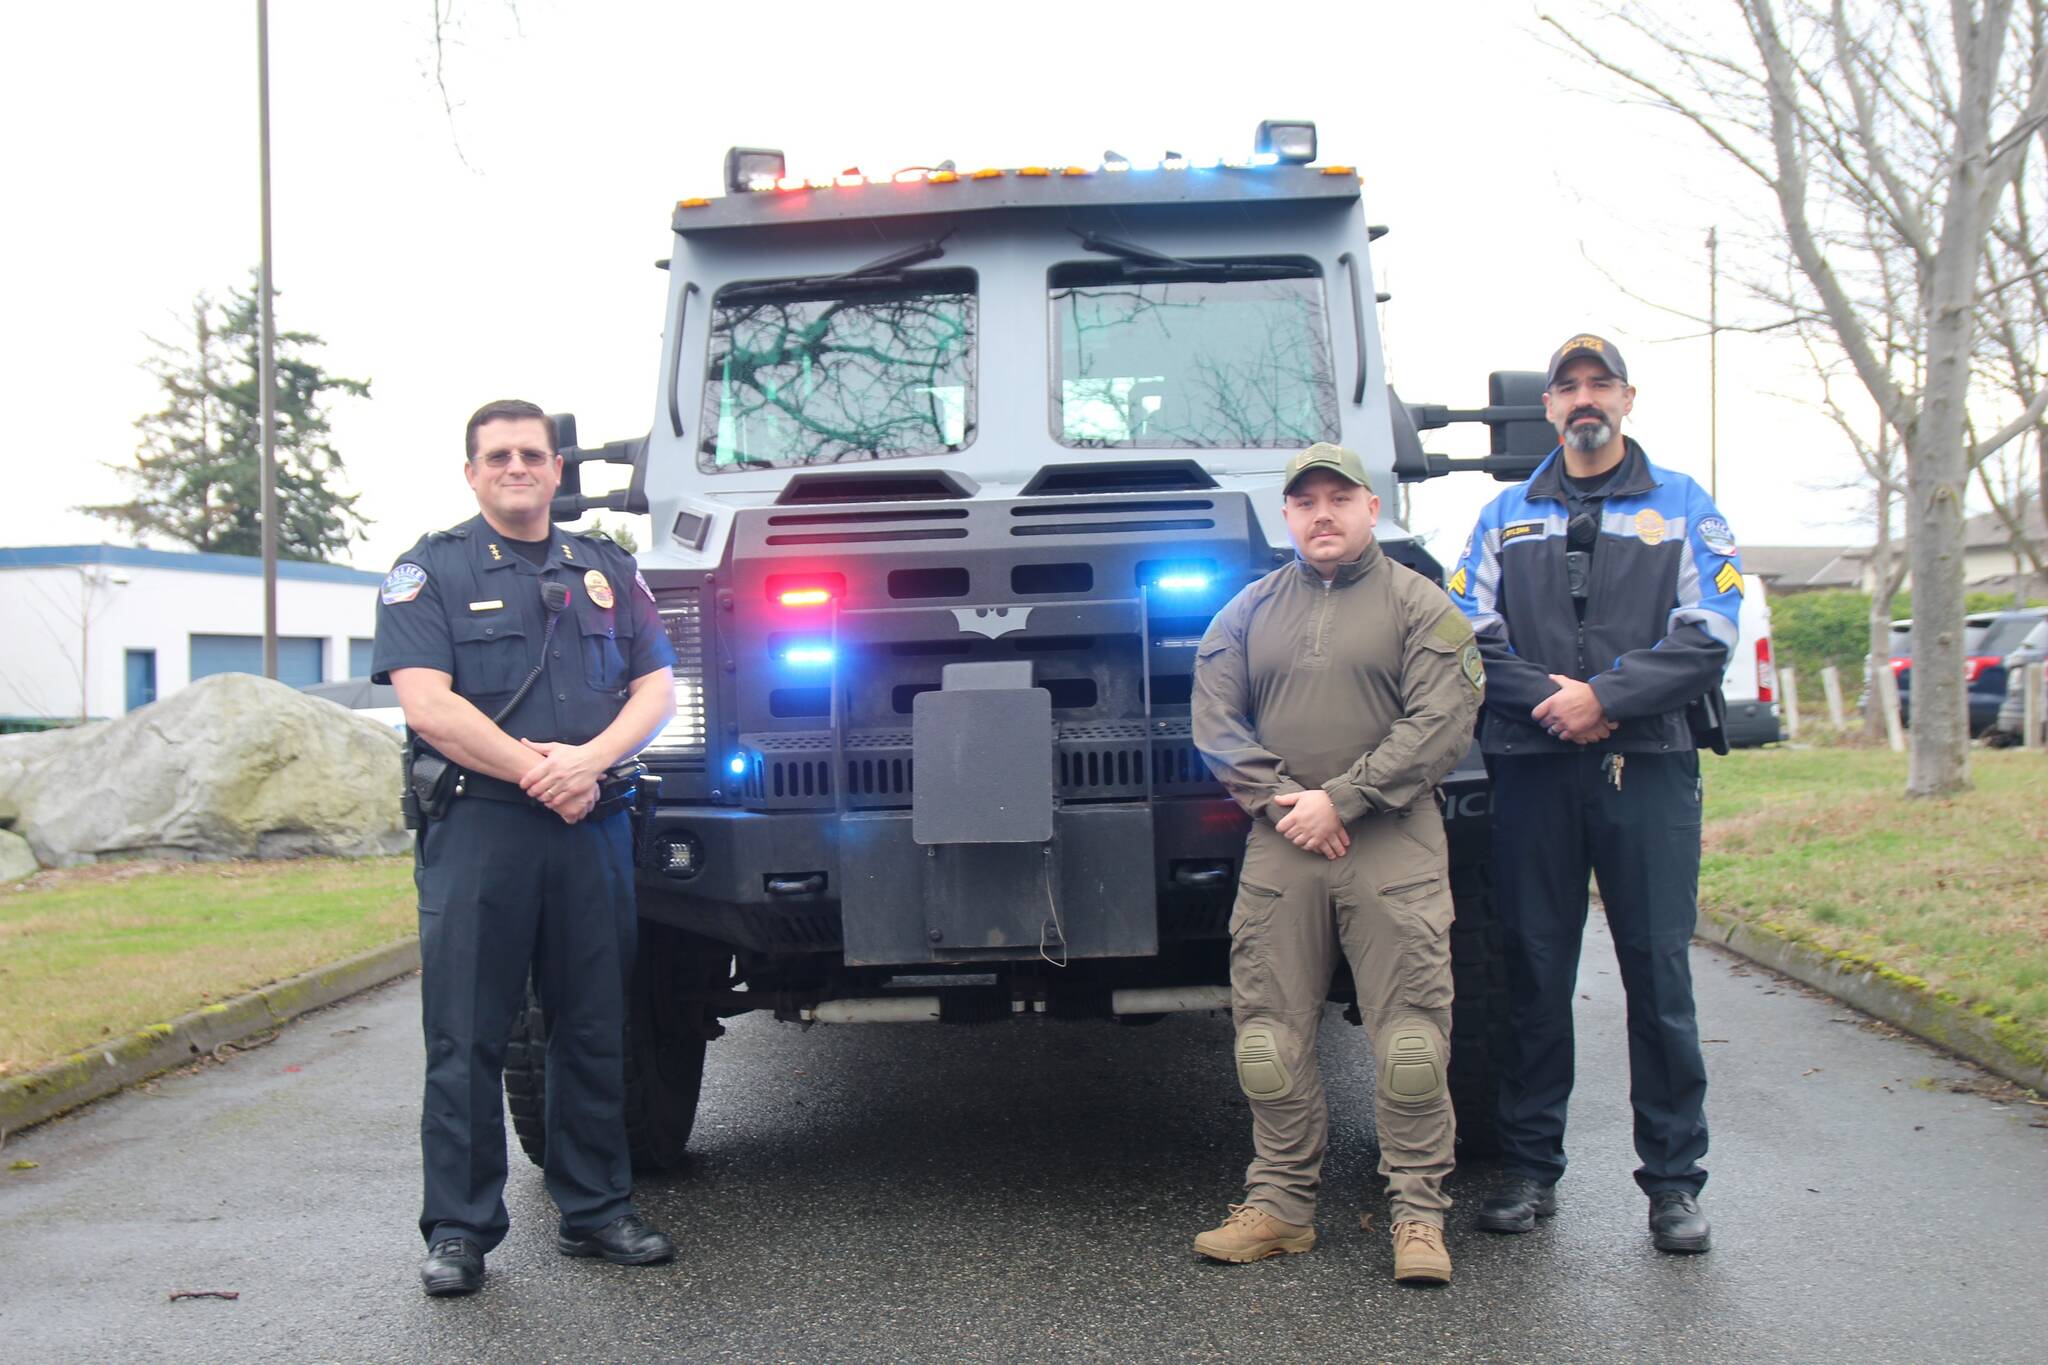 From left, Oak Harbor Police Chief Tony Slowik, Detective Greg Wendell and Sgt. Jon Bylsma stand in front of the BATT. (Photo by Jessie Stensland)